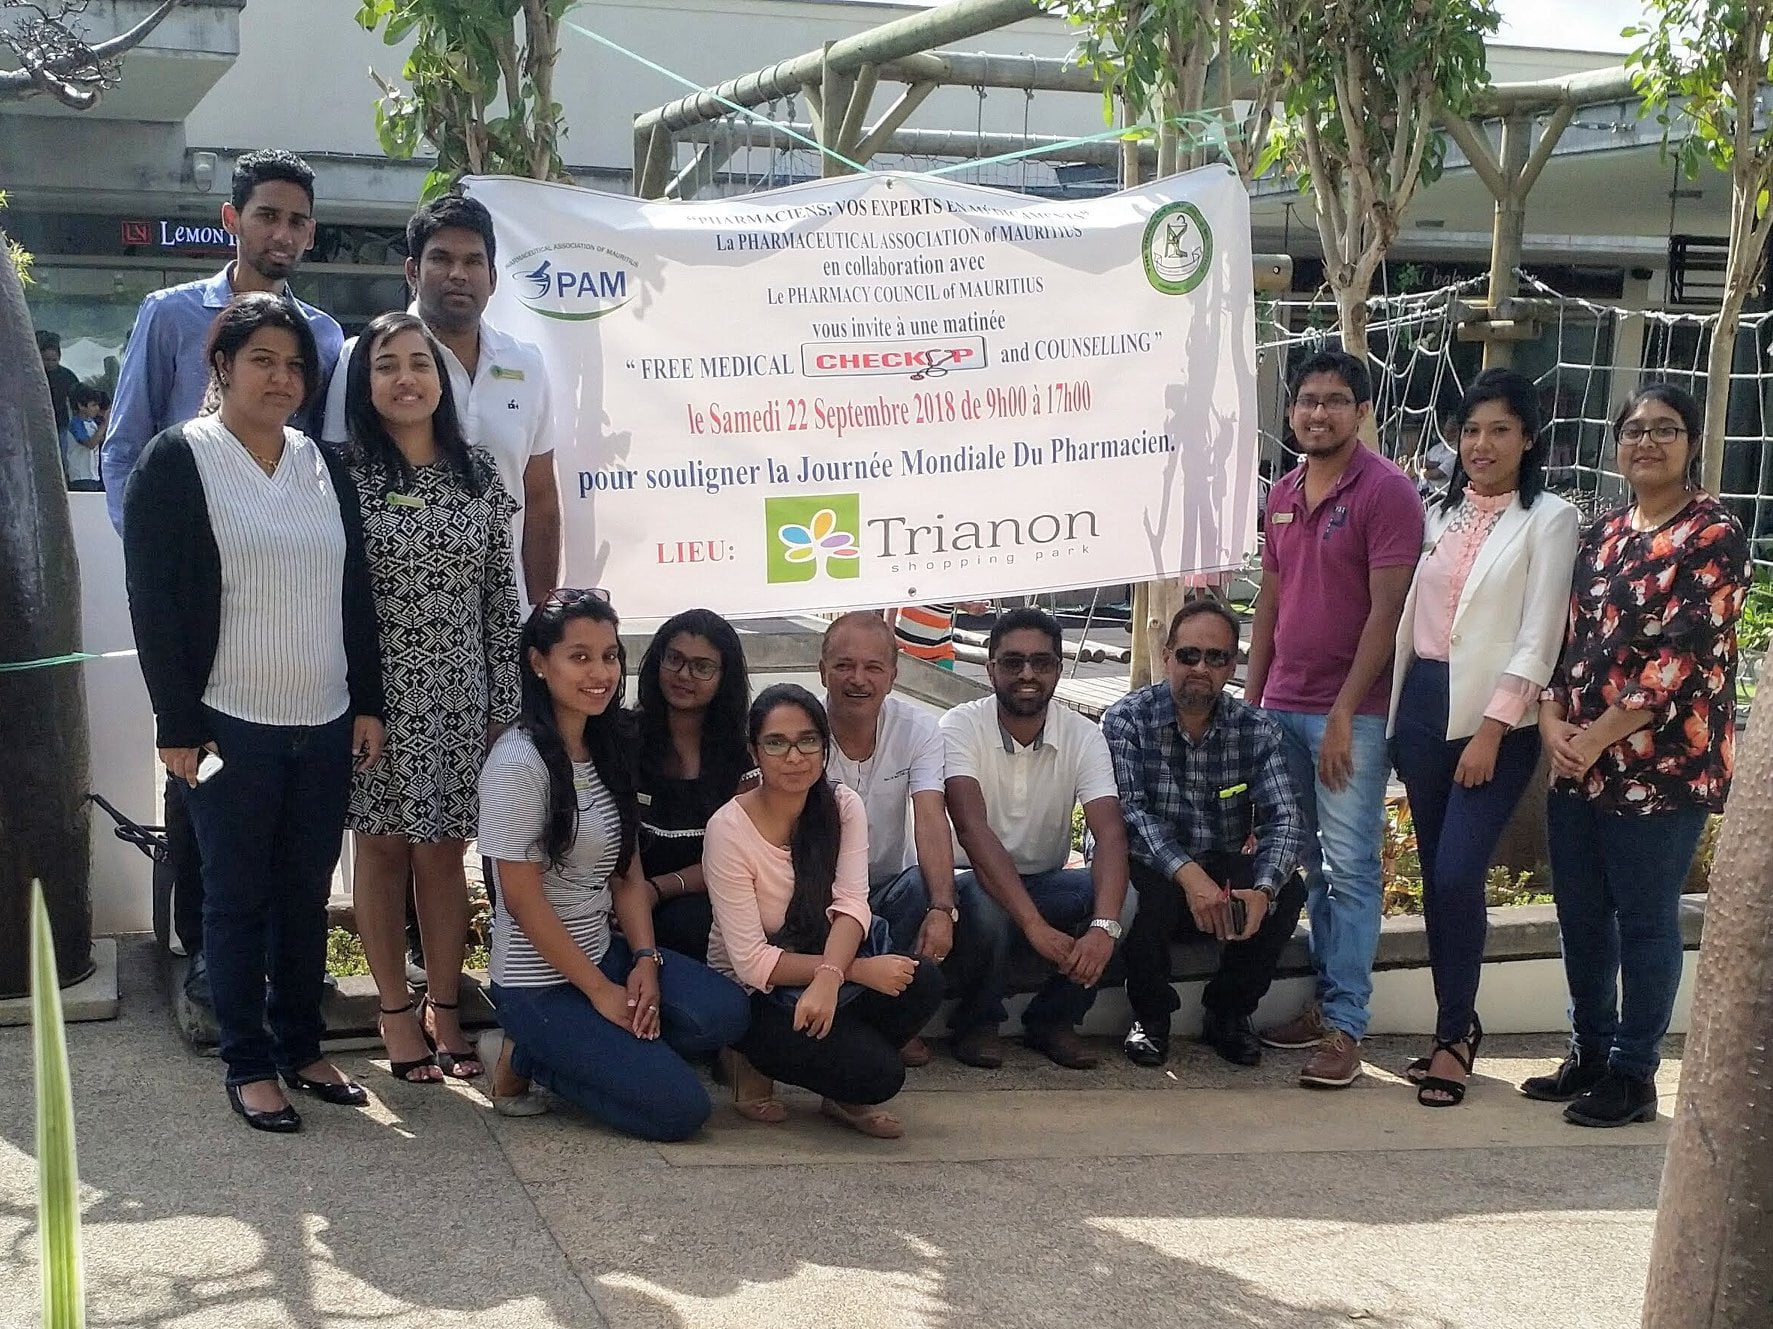 The Pharmaceutical Association of Mauritius held a health day at the Trianon Shopping Centre